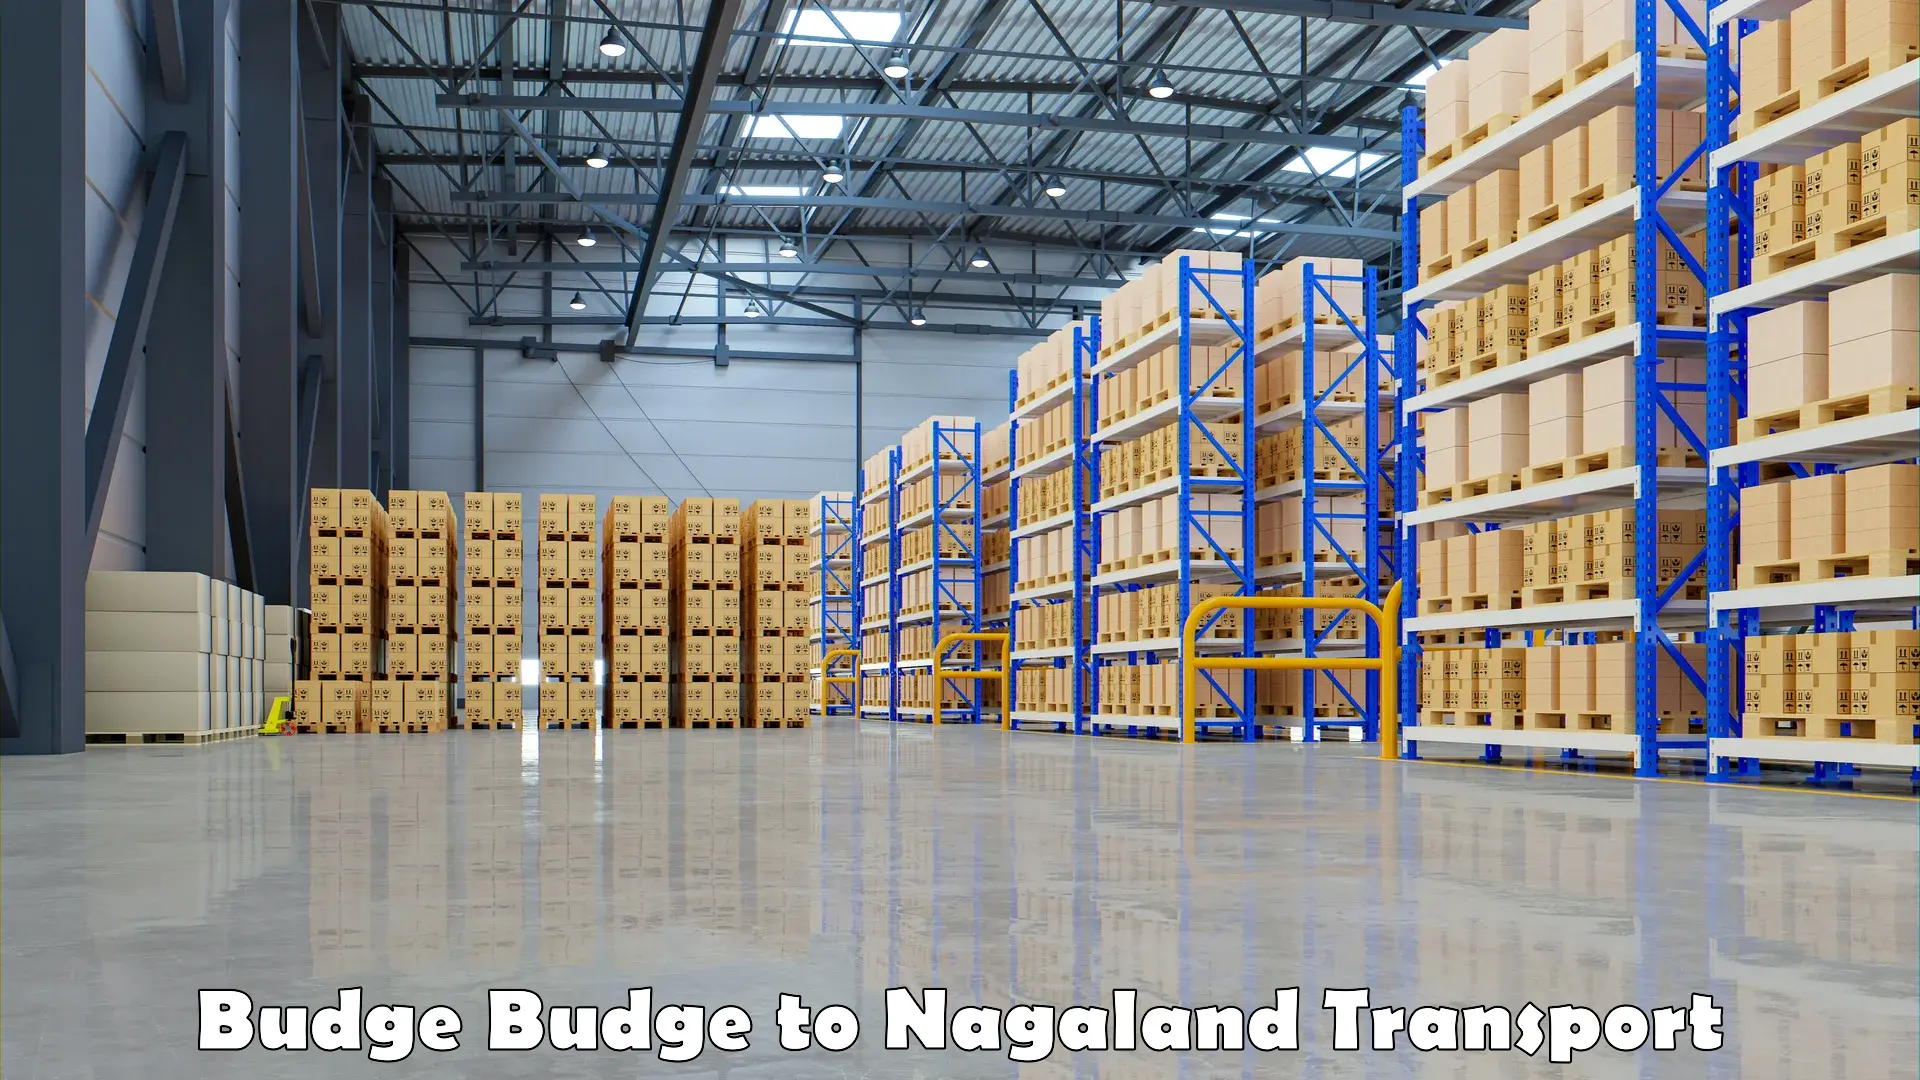 Nearby transport service in Budge Budge to Nagaland